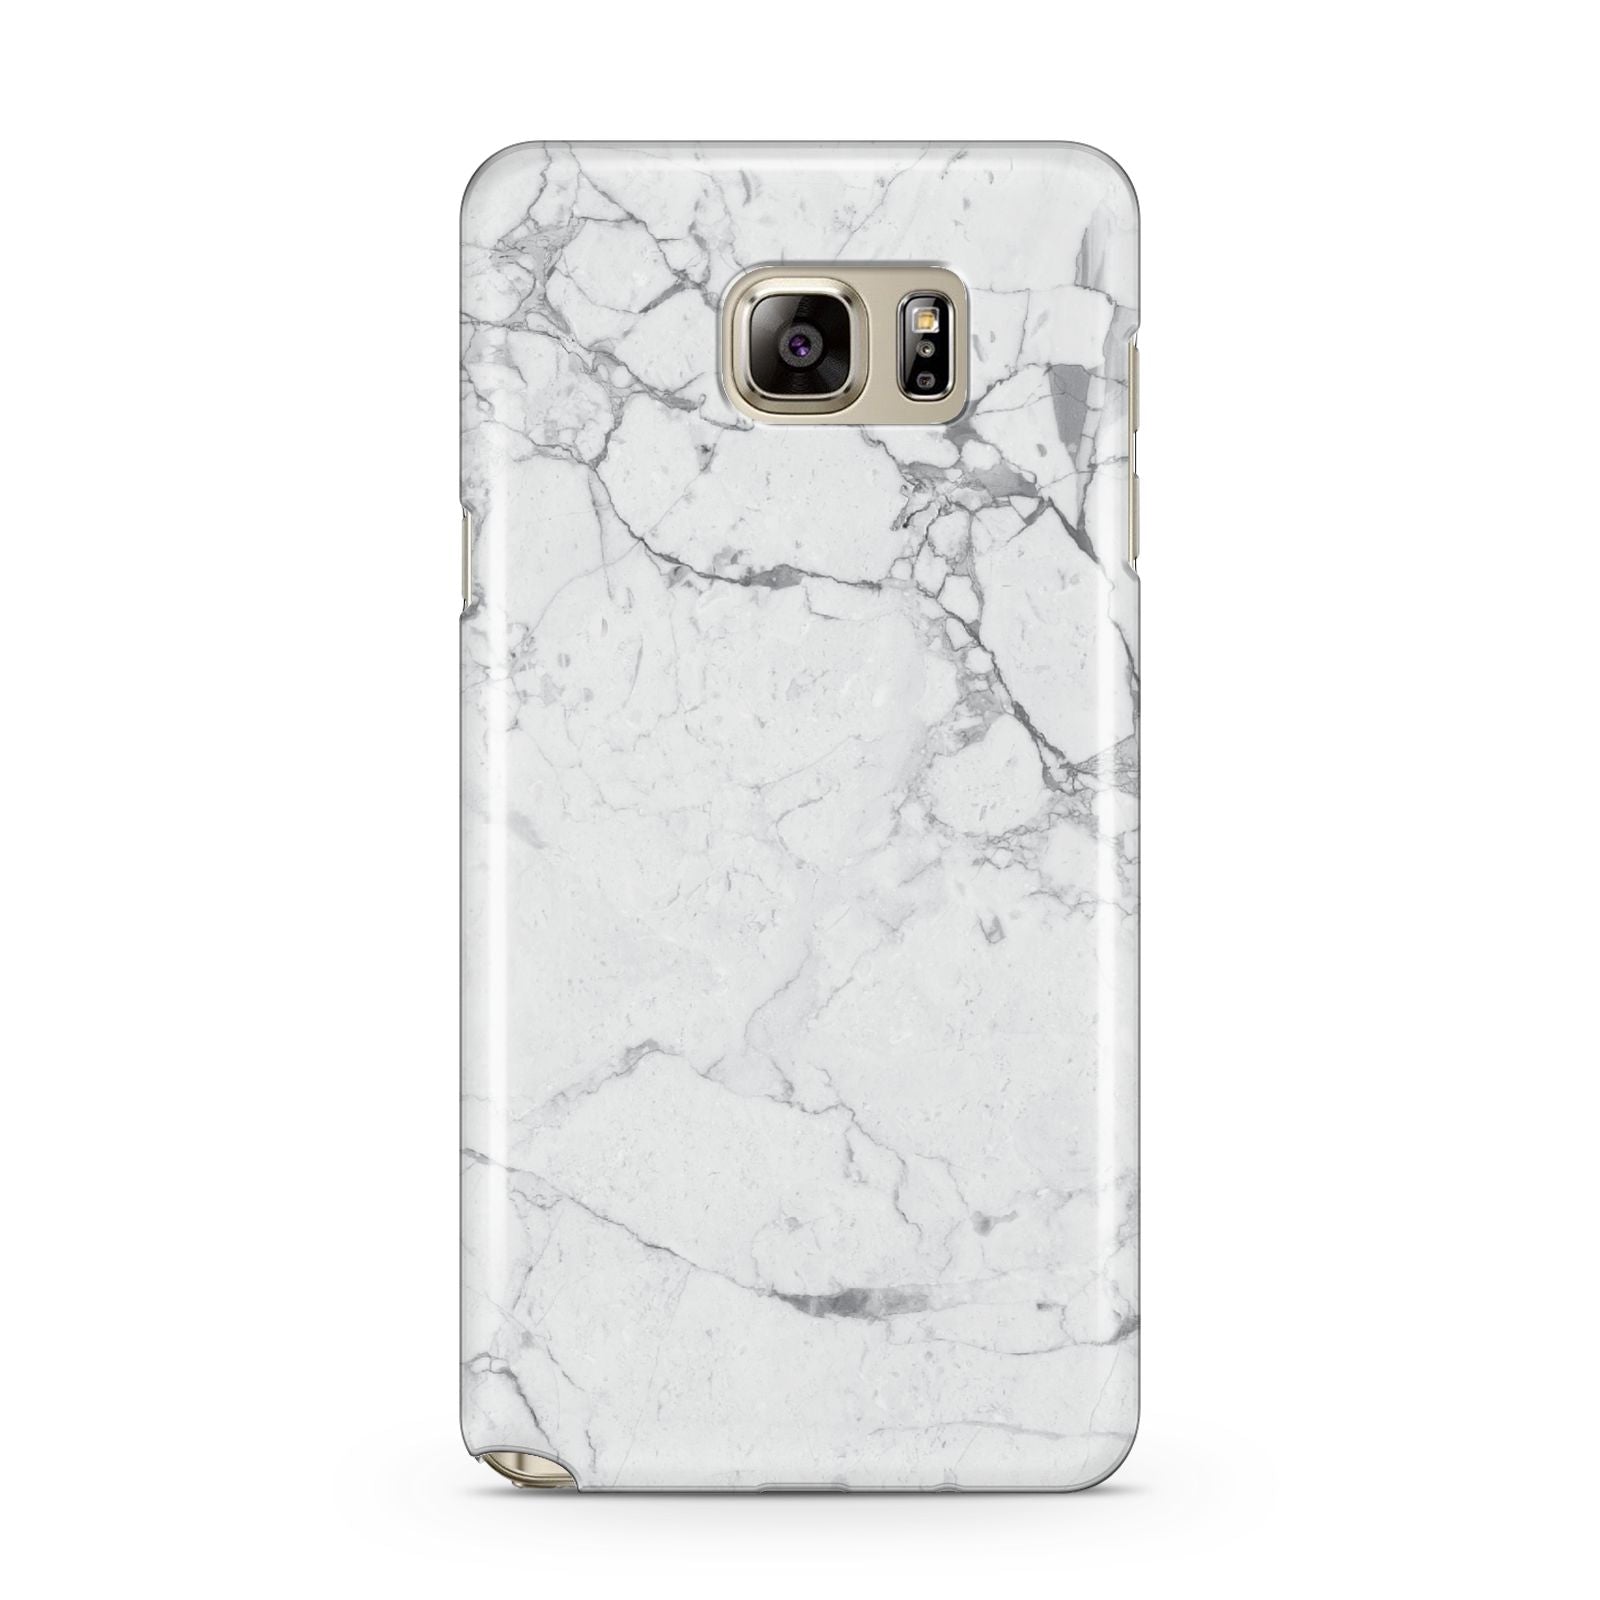 Faux Marble Effect Grey White Samsung Galaxy Note 5 Case